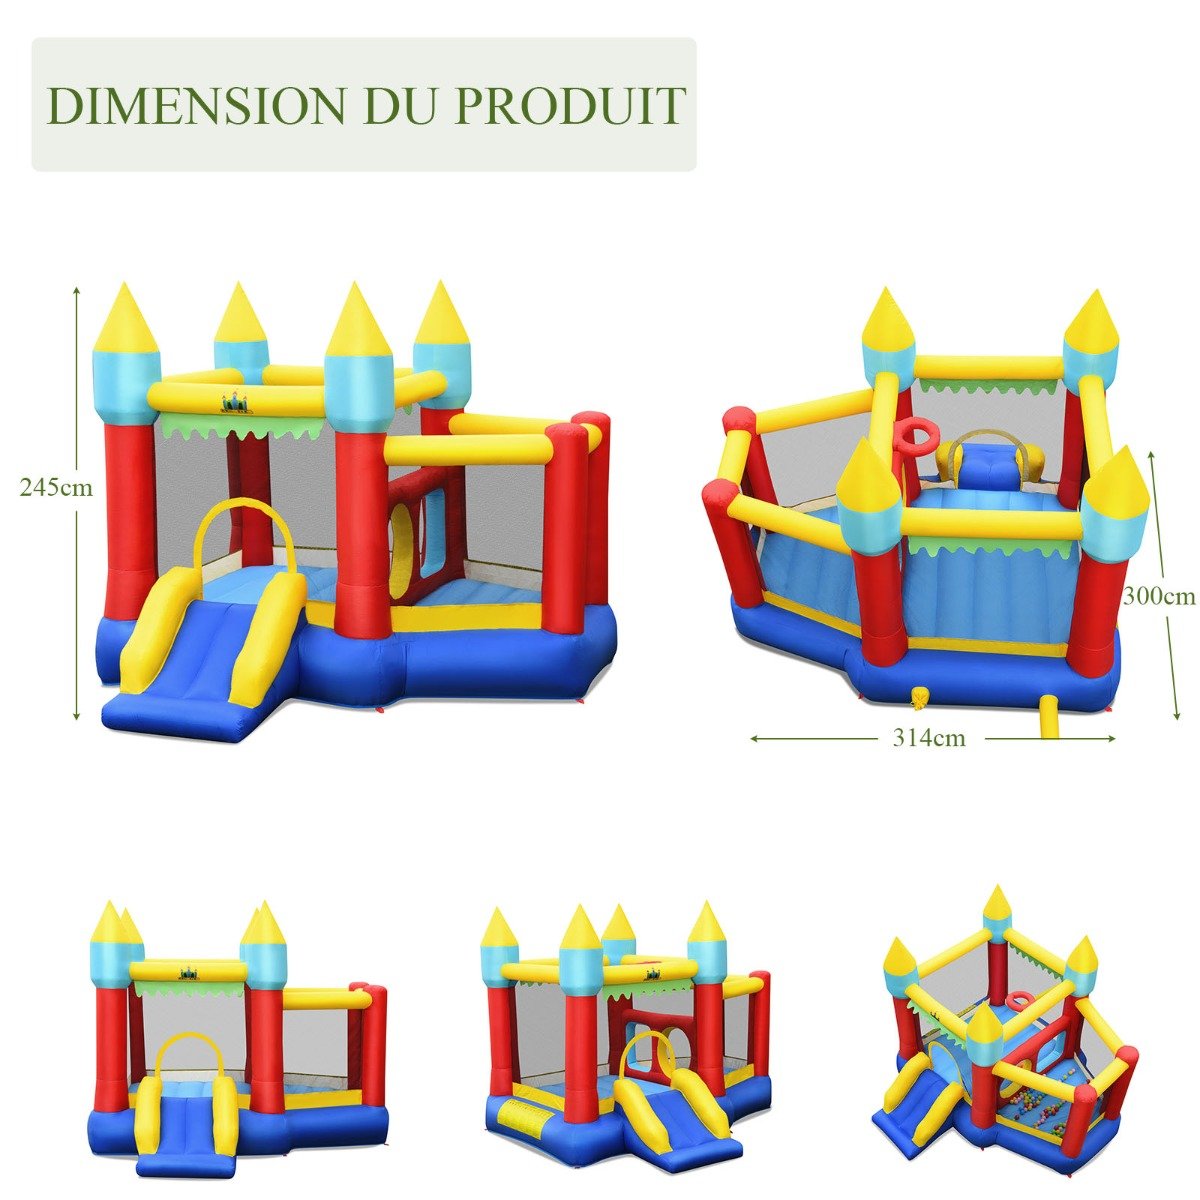 Inflatable Playhouse with Slide, Basketball & 100 Ocean Balls - Active Fun